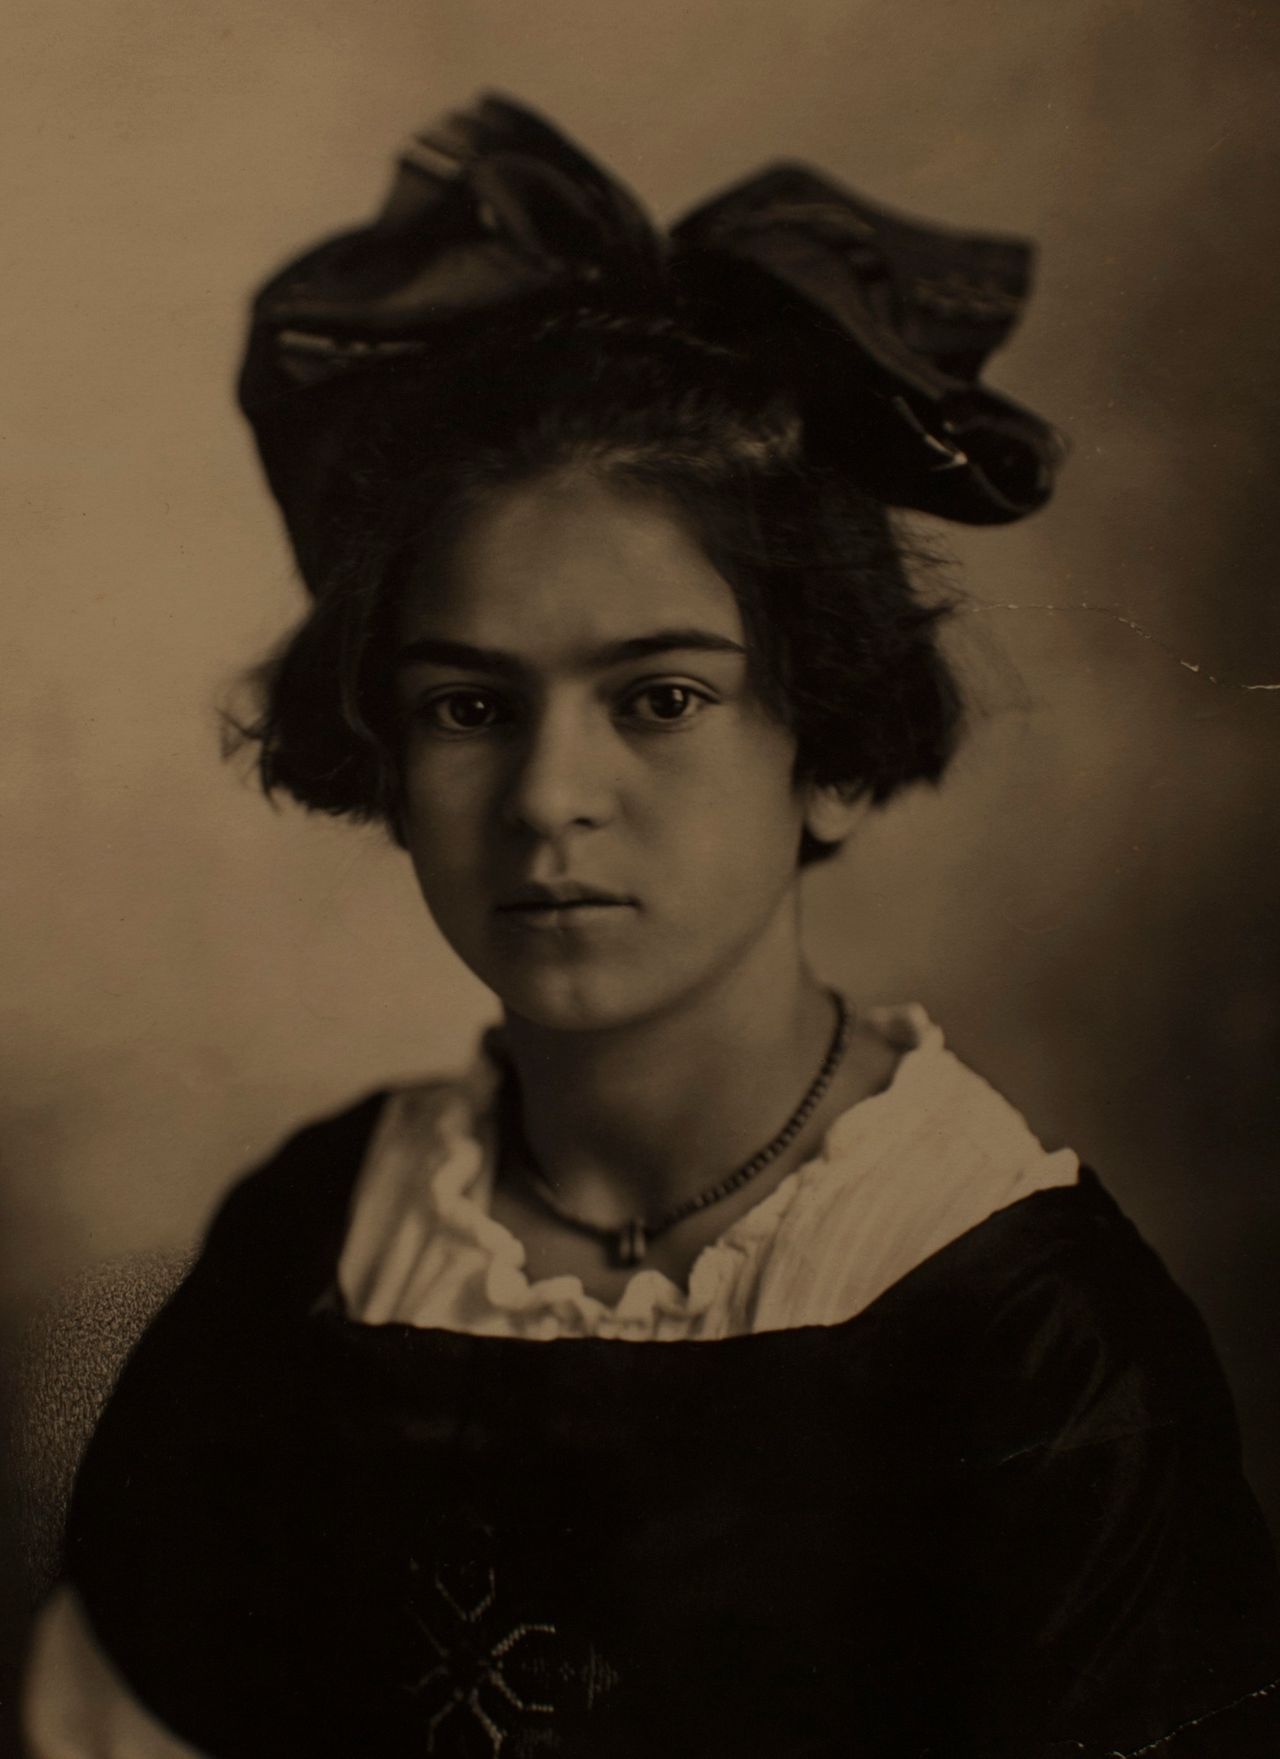 A portrait of Frida Kahlo by her father, Guillermo Kahlo, is displayed at the Frida Kahlo museum in Mexico City.